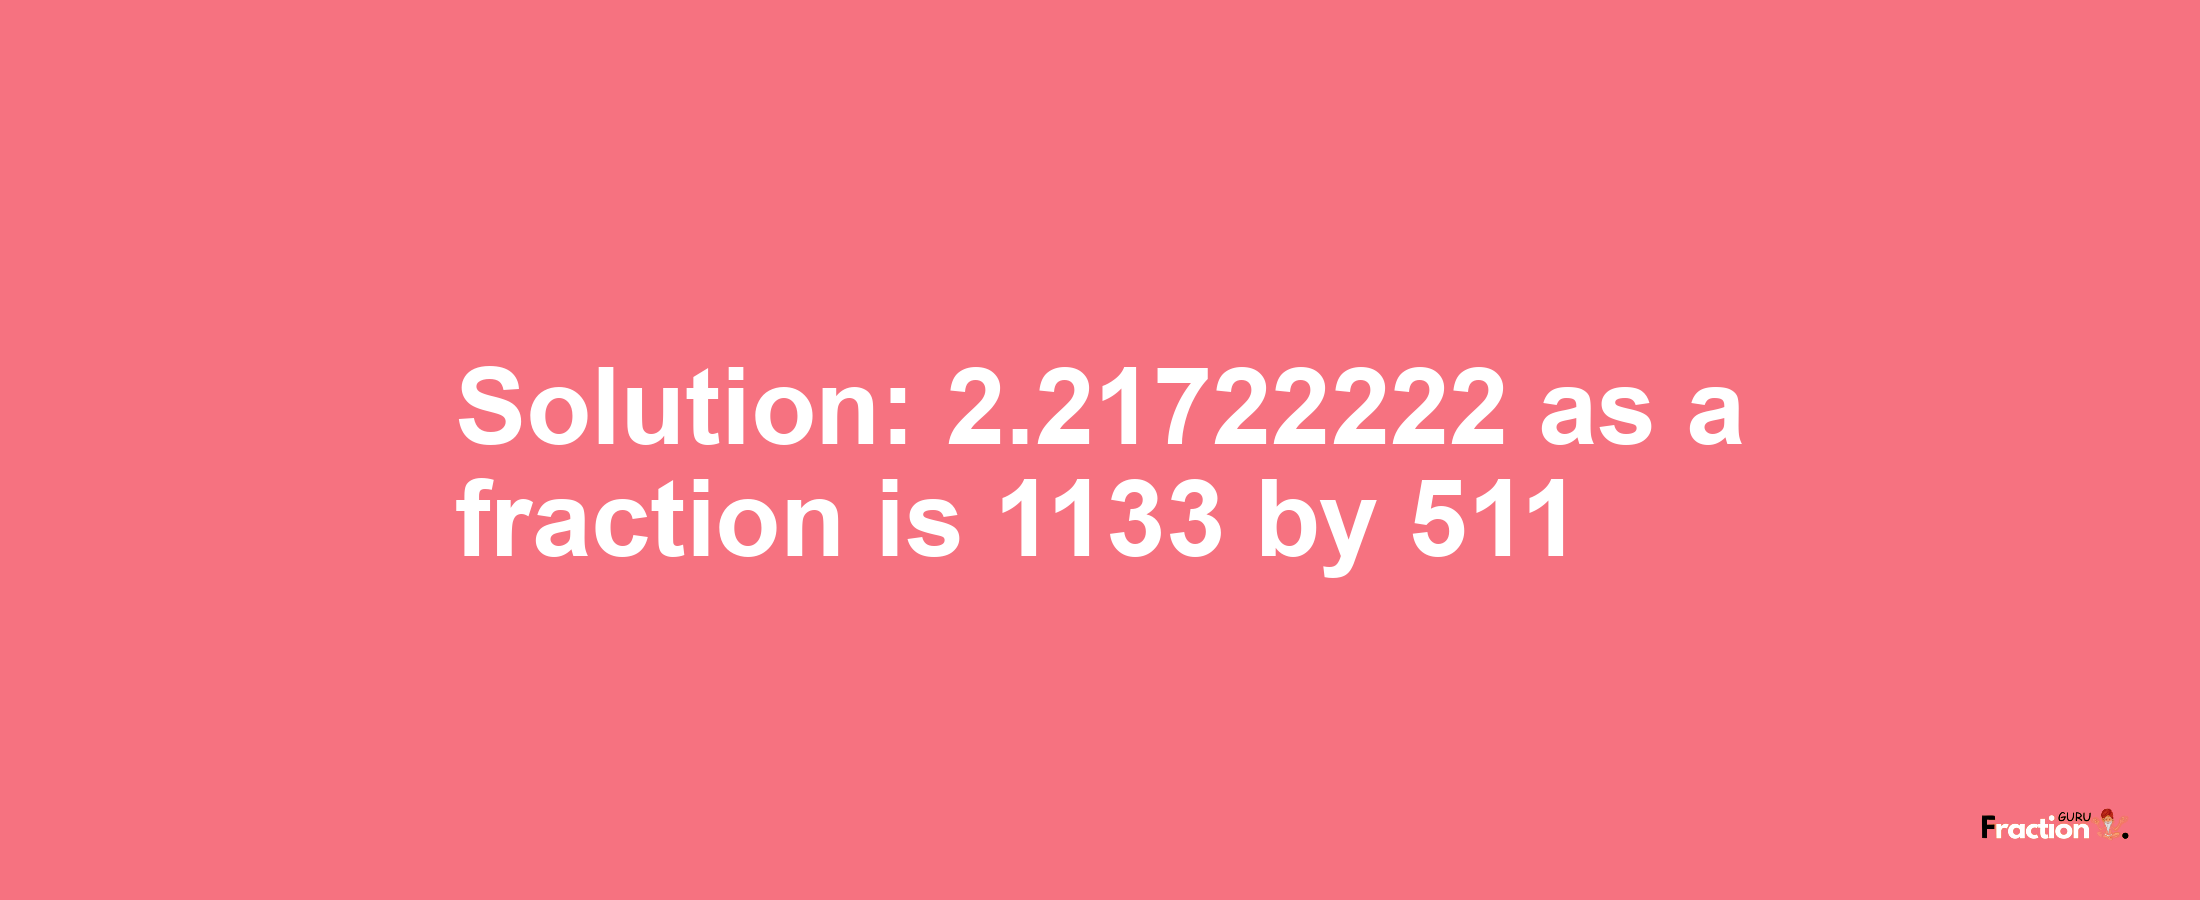 Solution:2.21722222 as a fraction is 1133/511